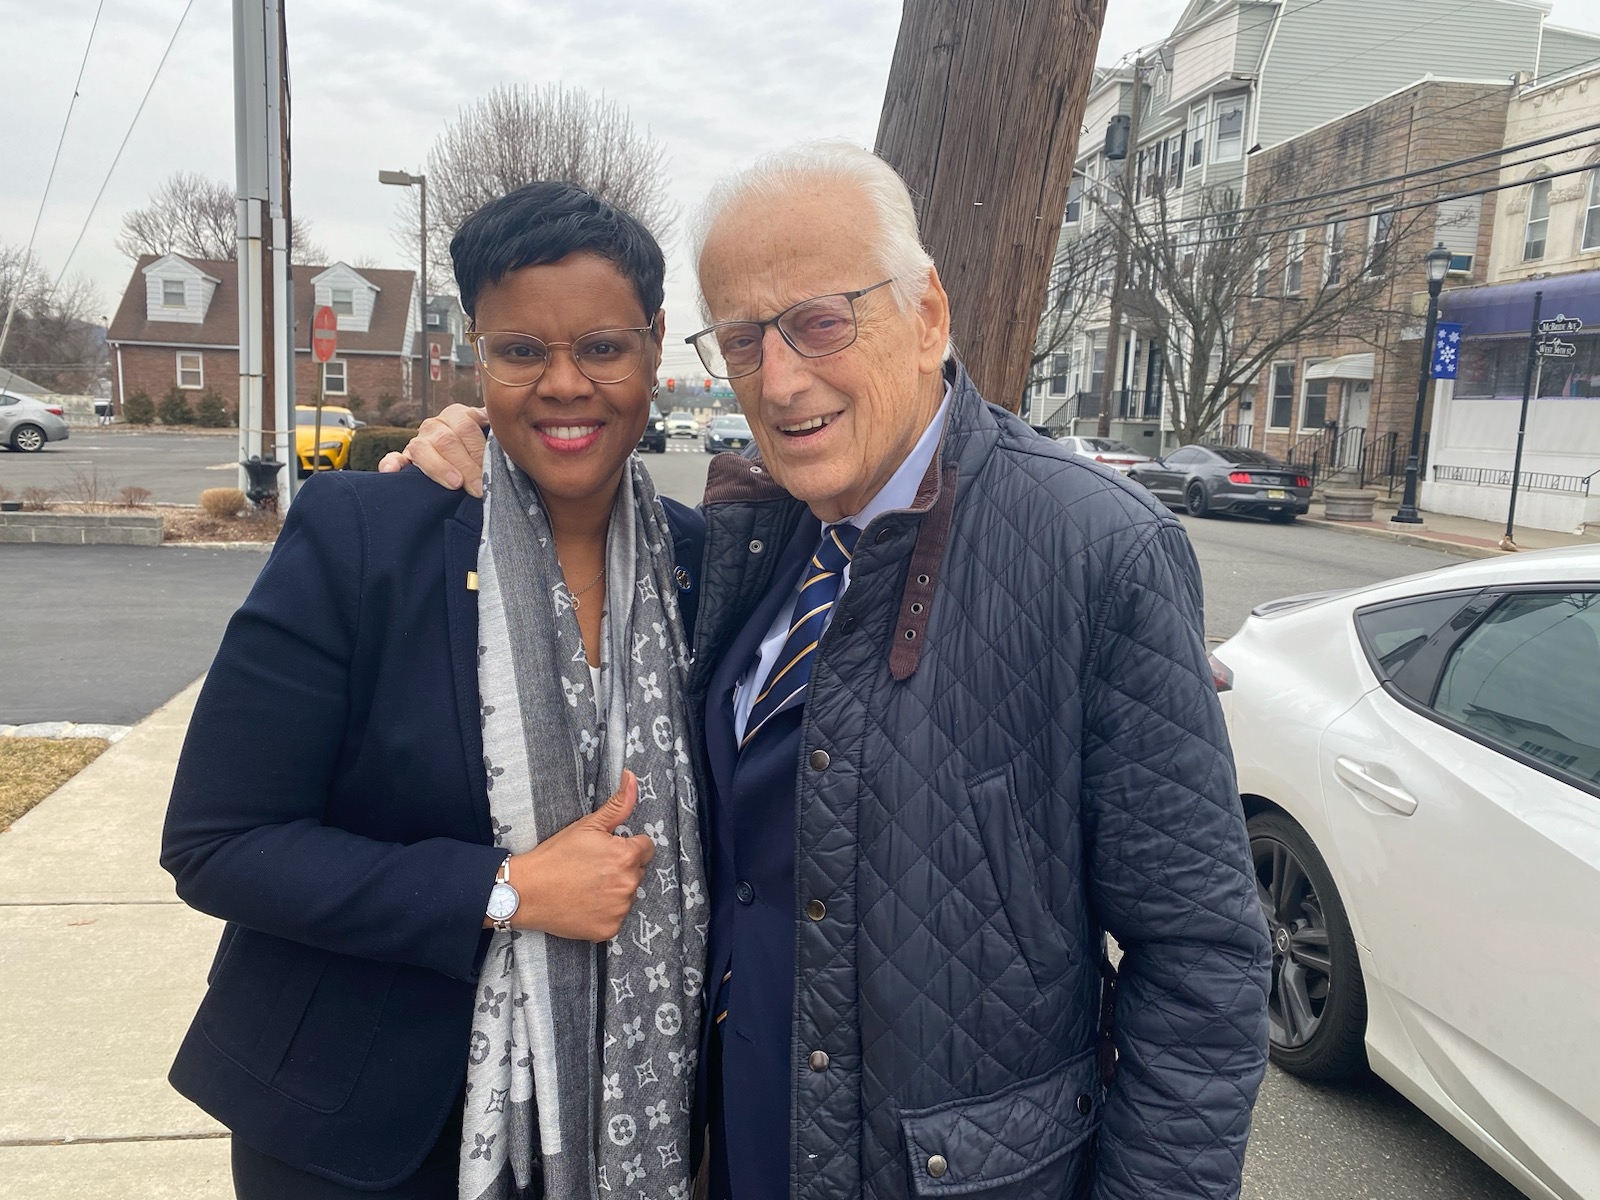 Pascrell Continues to Receive Support from the Passaic County Democrats - Insider NJ